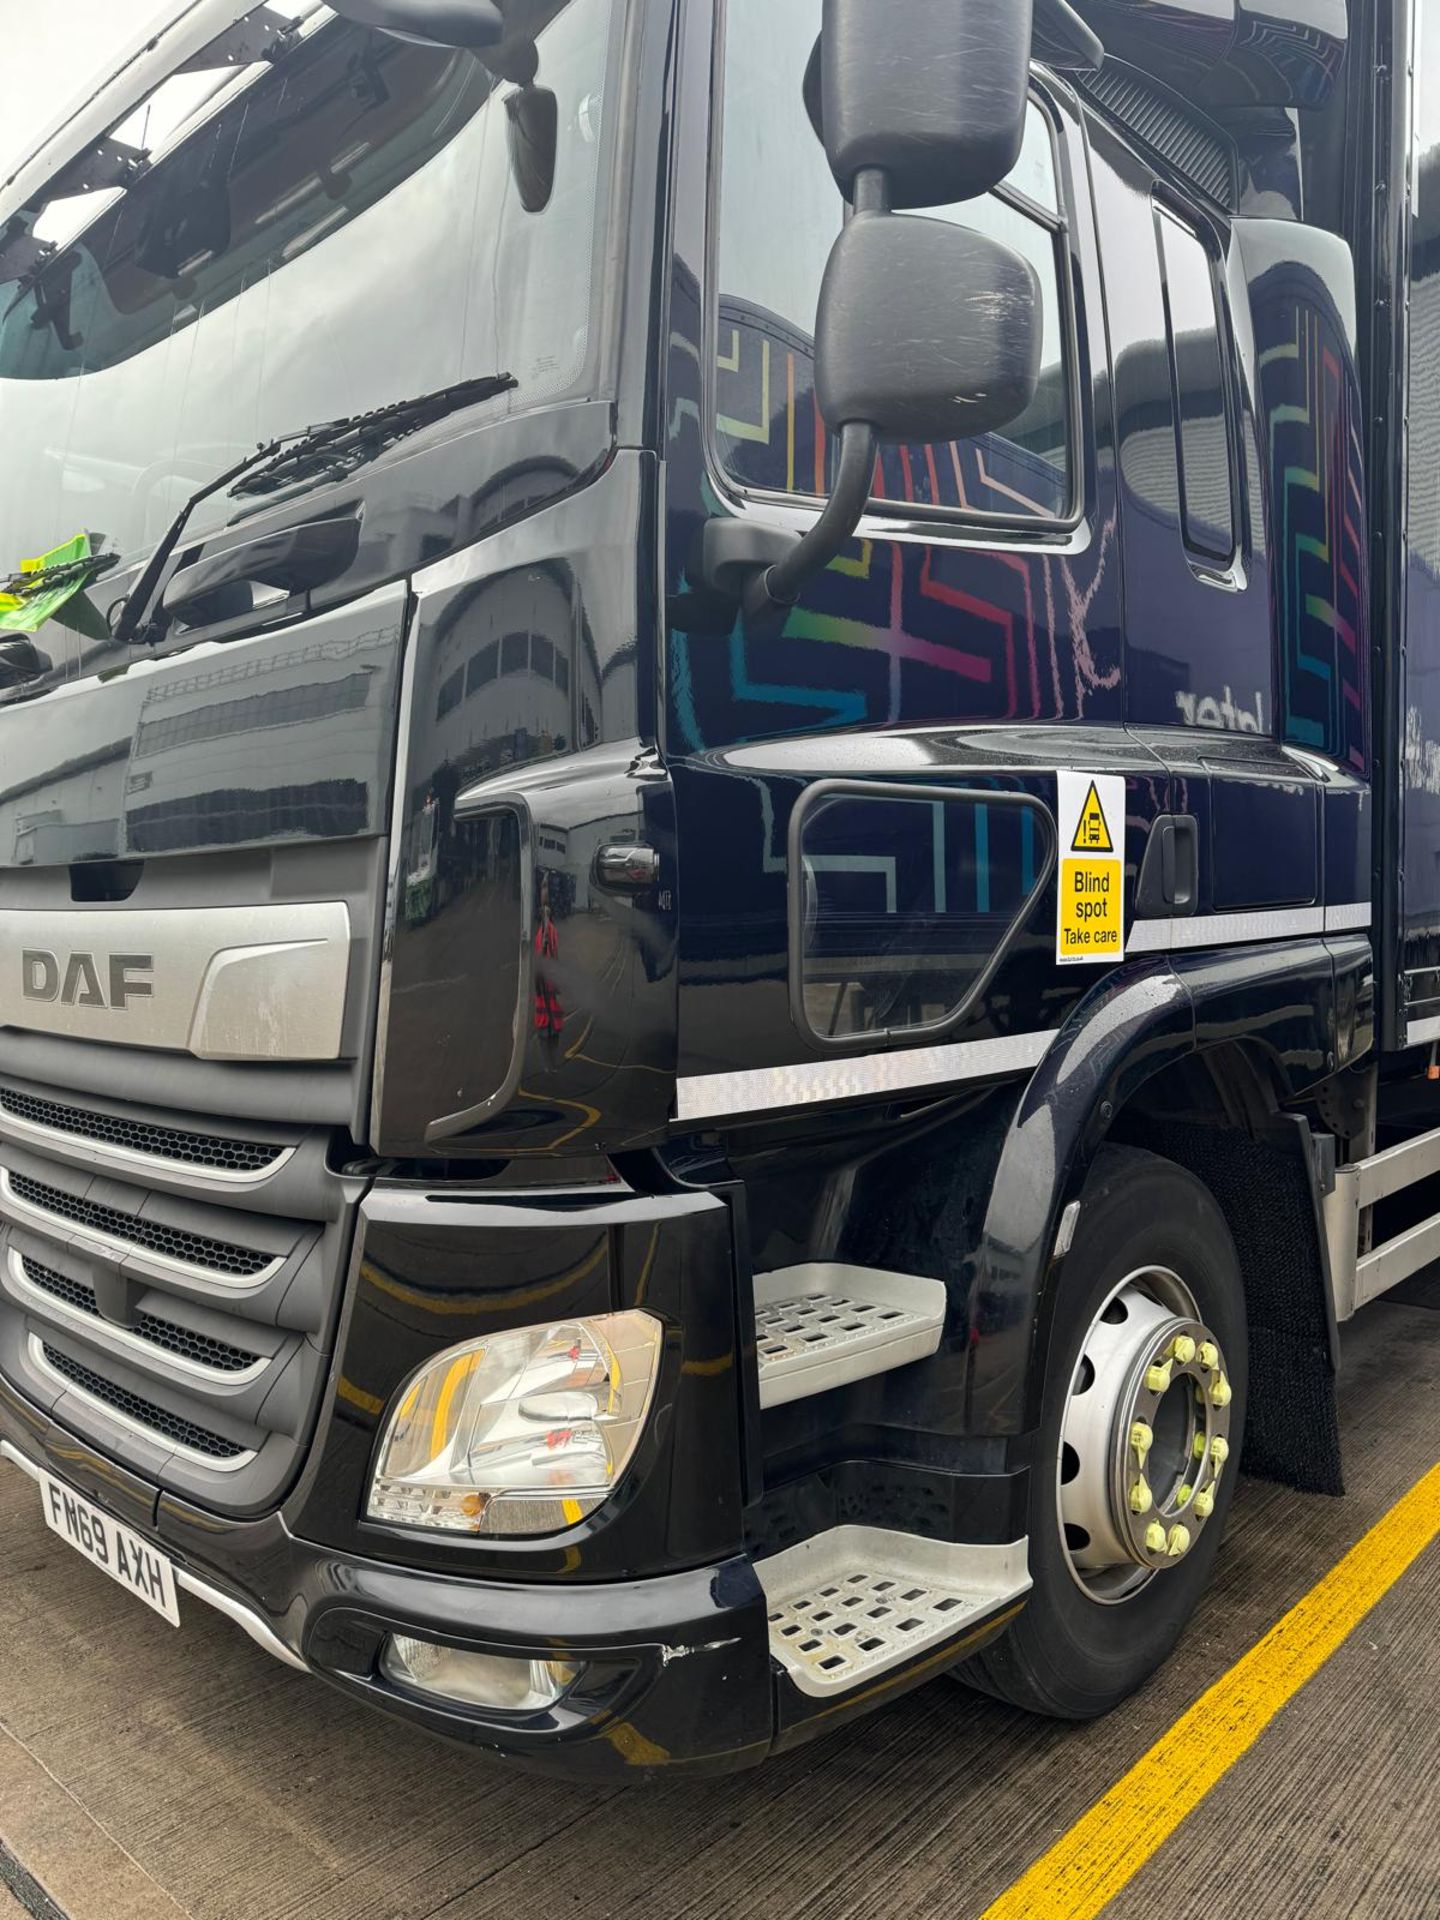 2019, DAF CF 260 FA (Ex-Fleet Owned & Maintained) - FN69 AXH (18 Ton Rigid Truck with Tail Lift) - Image 7 of 14